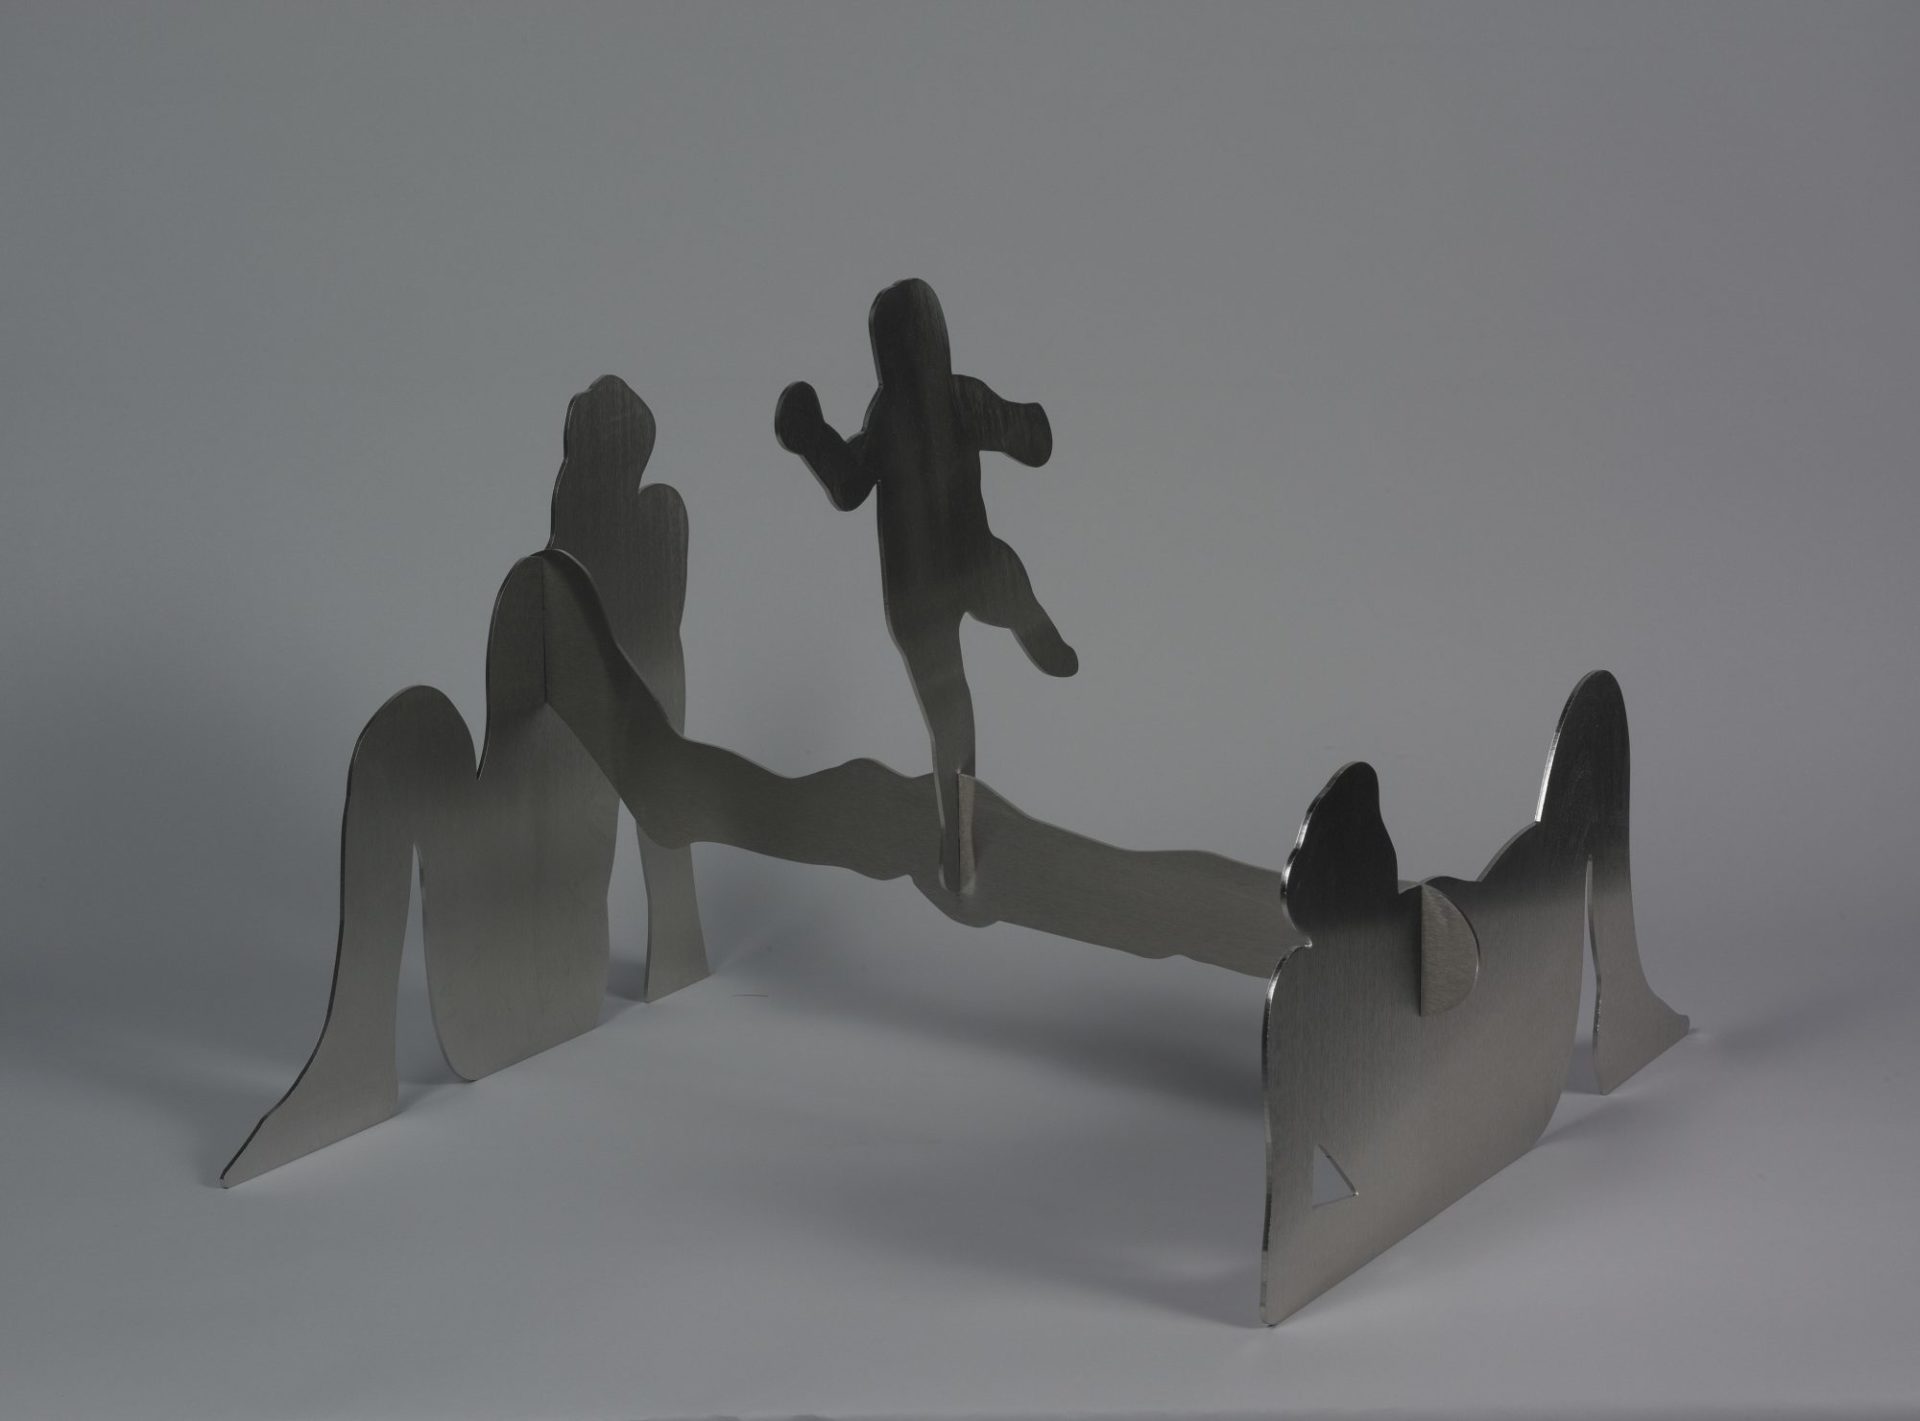 Balancing Act: Three Sculptures by William King